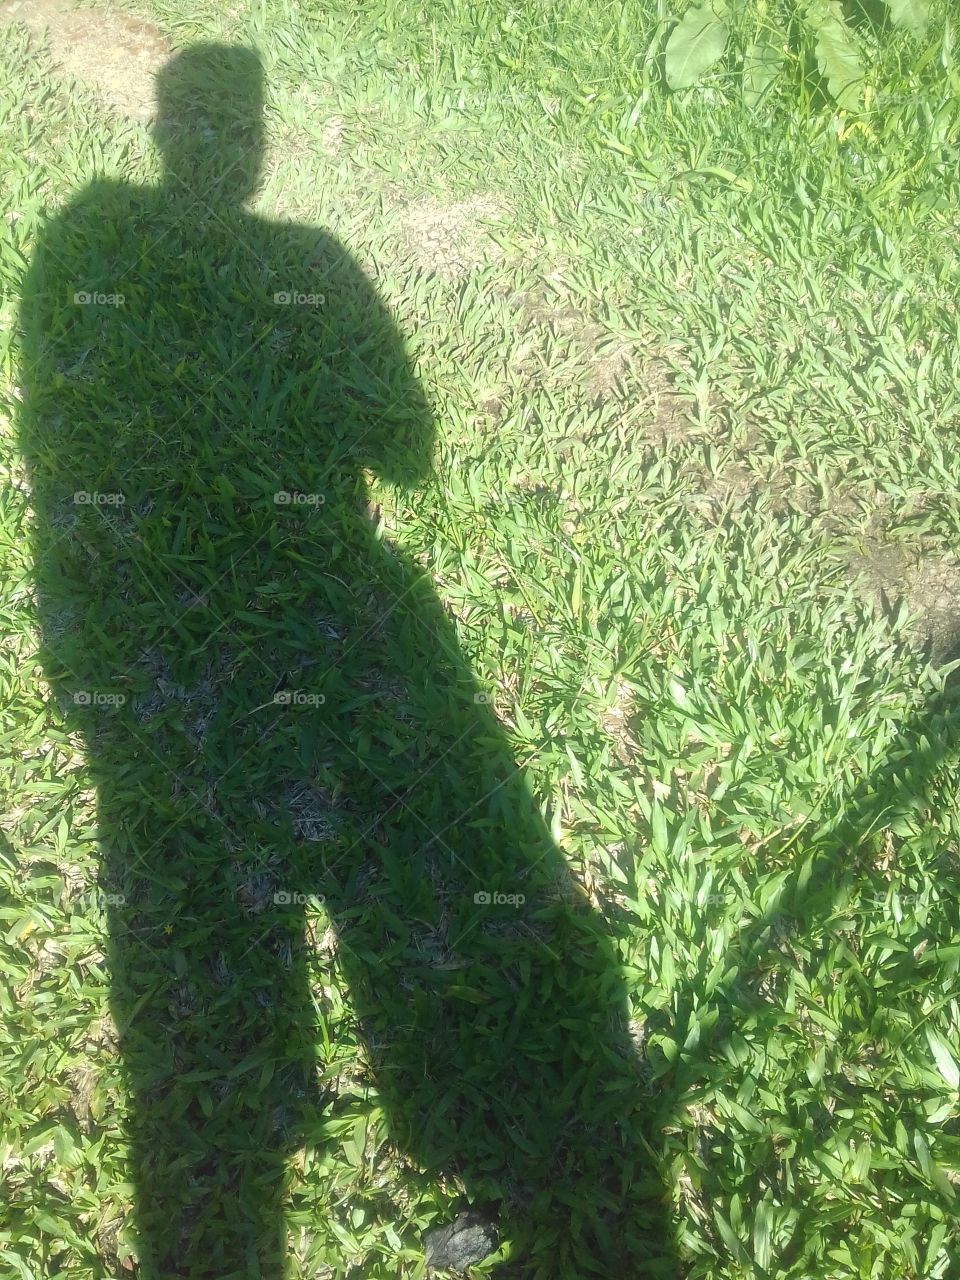 the shadow in the grass